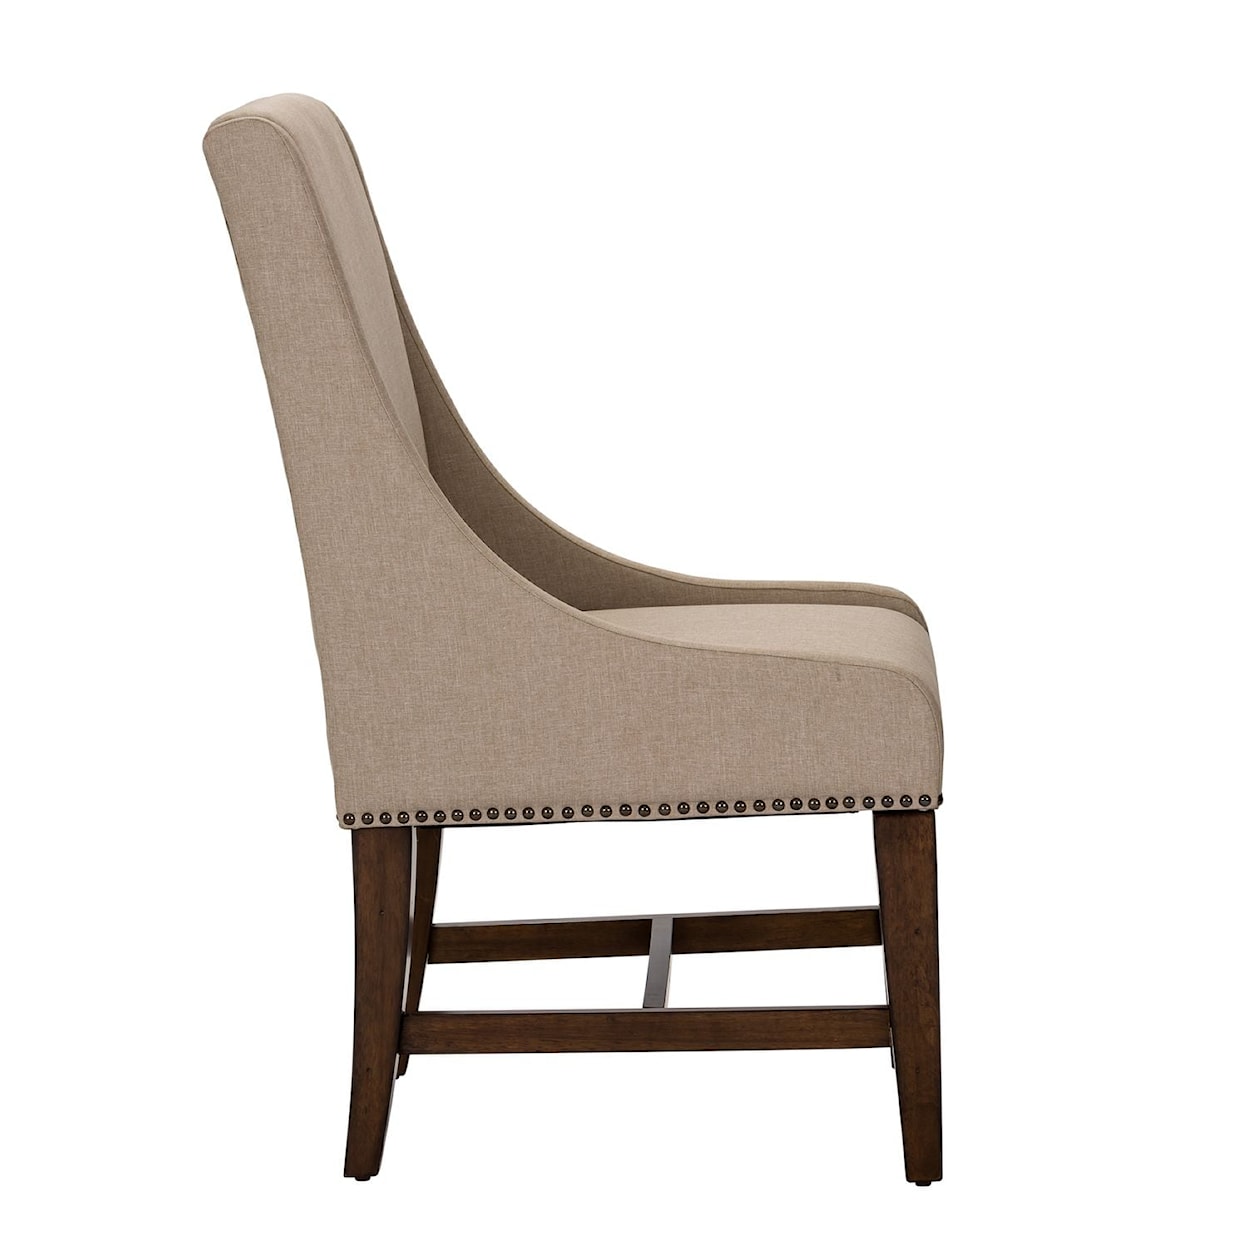 Libby Armand Upholstered Side Chair